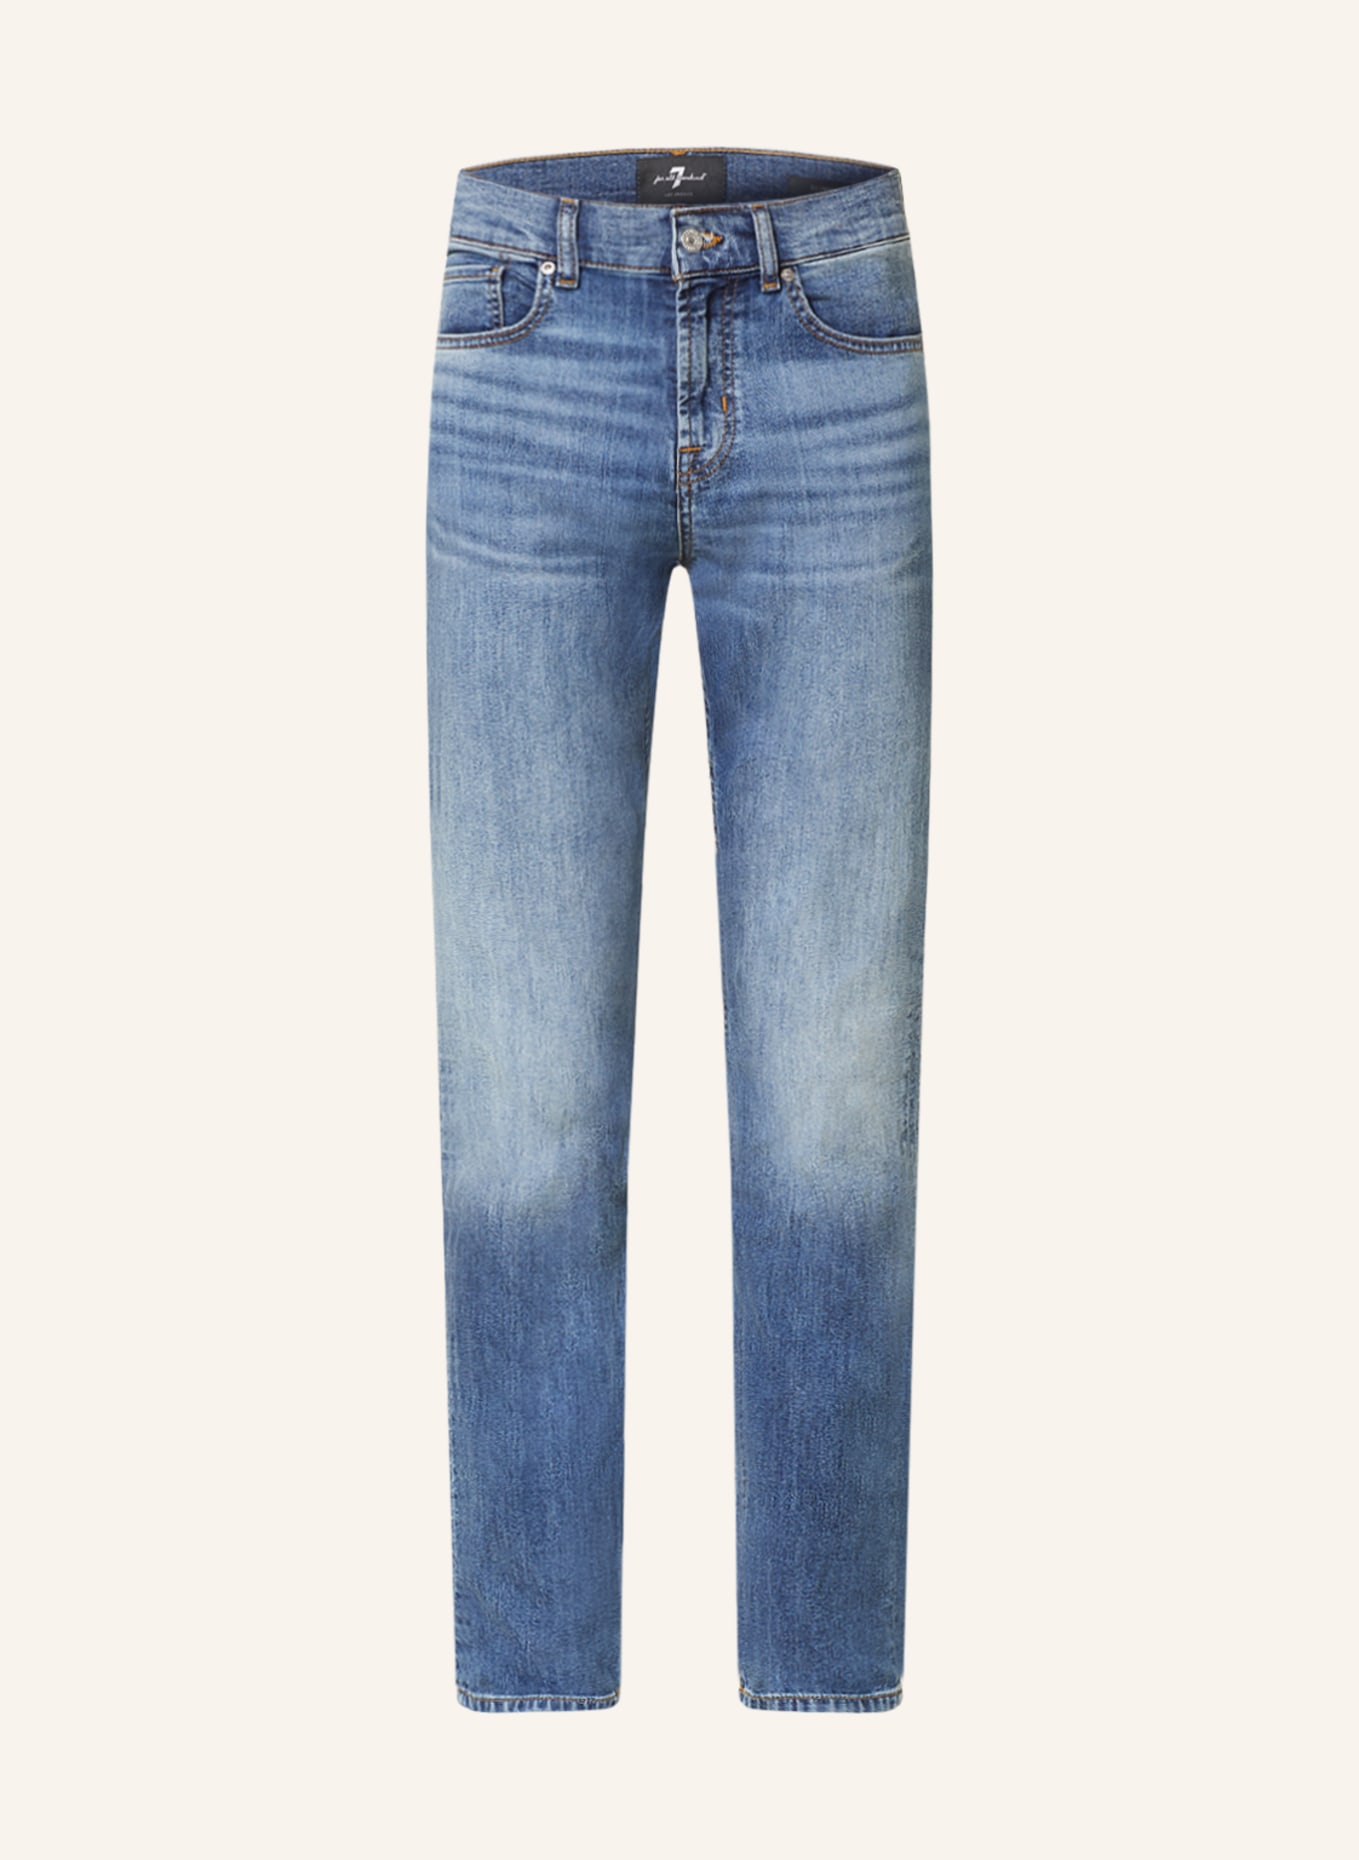 7 for all mankind Jeans SLIMMY Straight Fit, Farbe: MID BLUE (Bild 1)